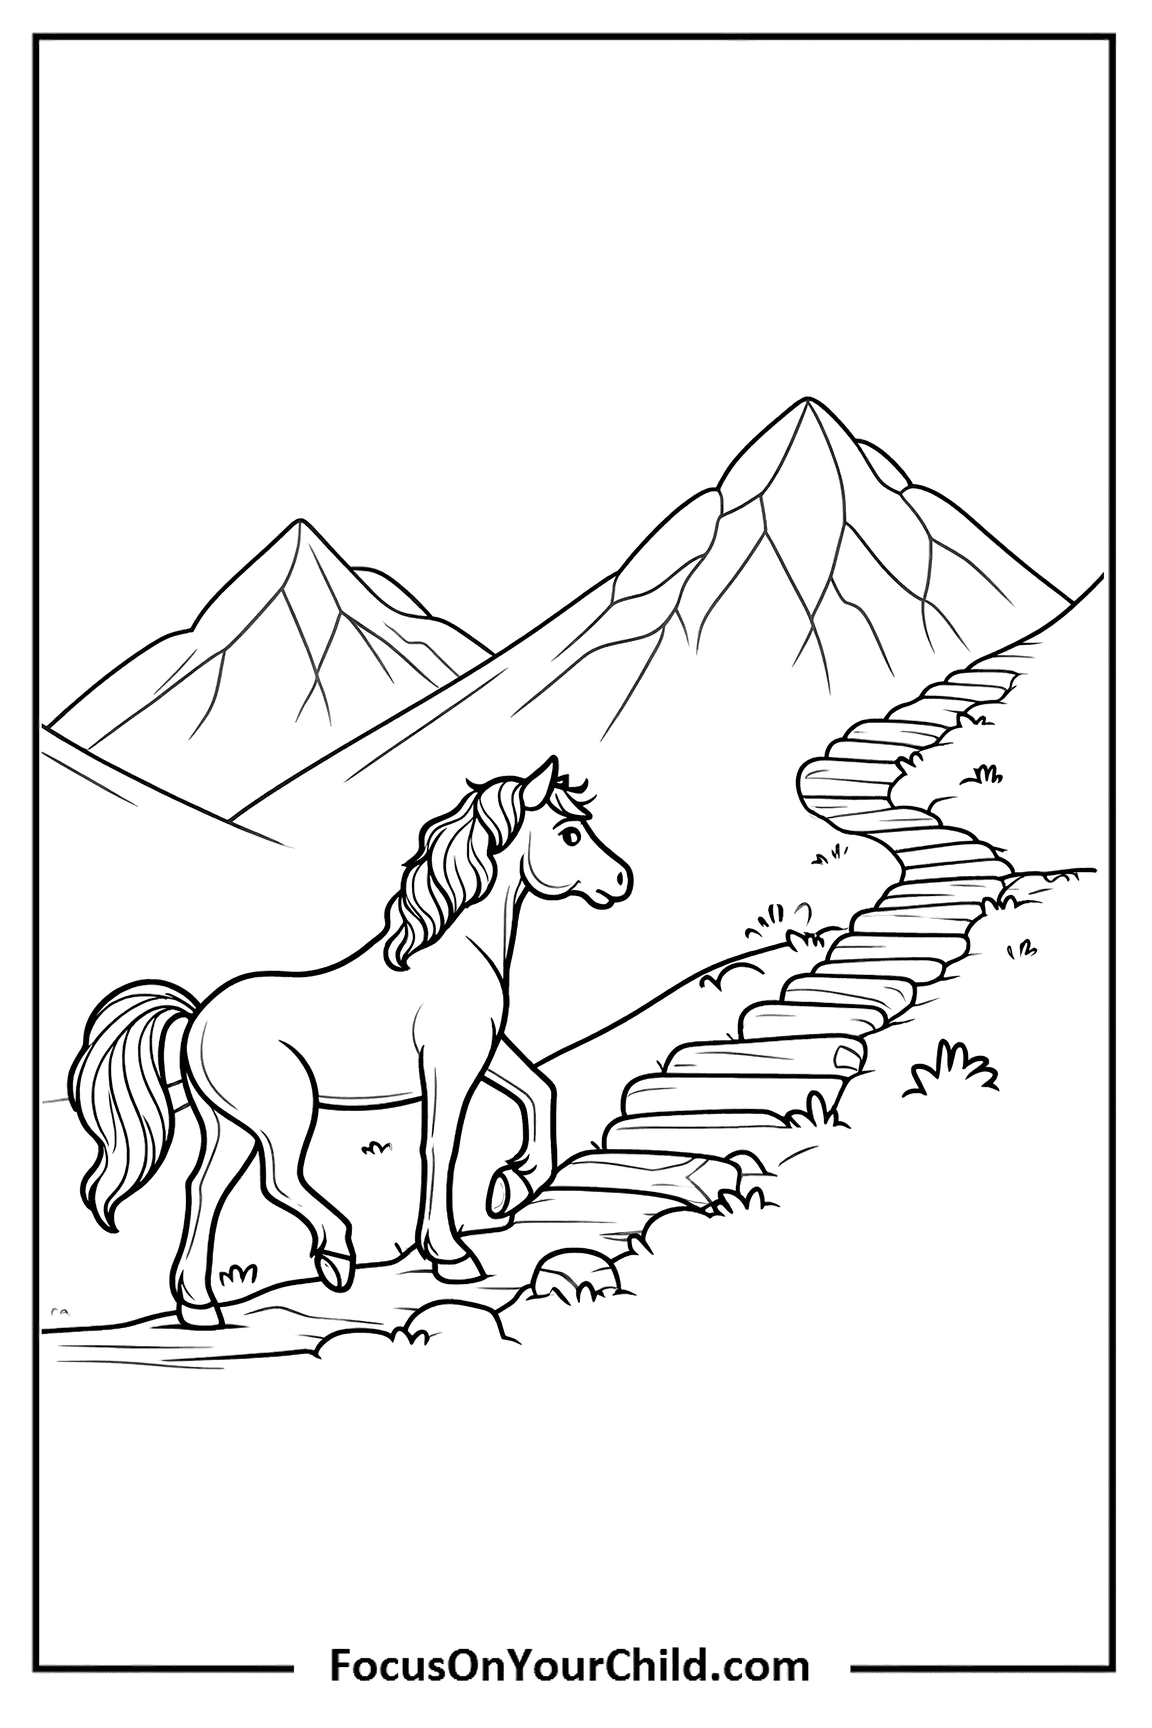 Charming horse drawing on mountain path for child activity.